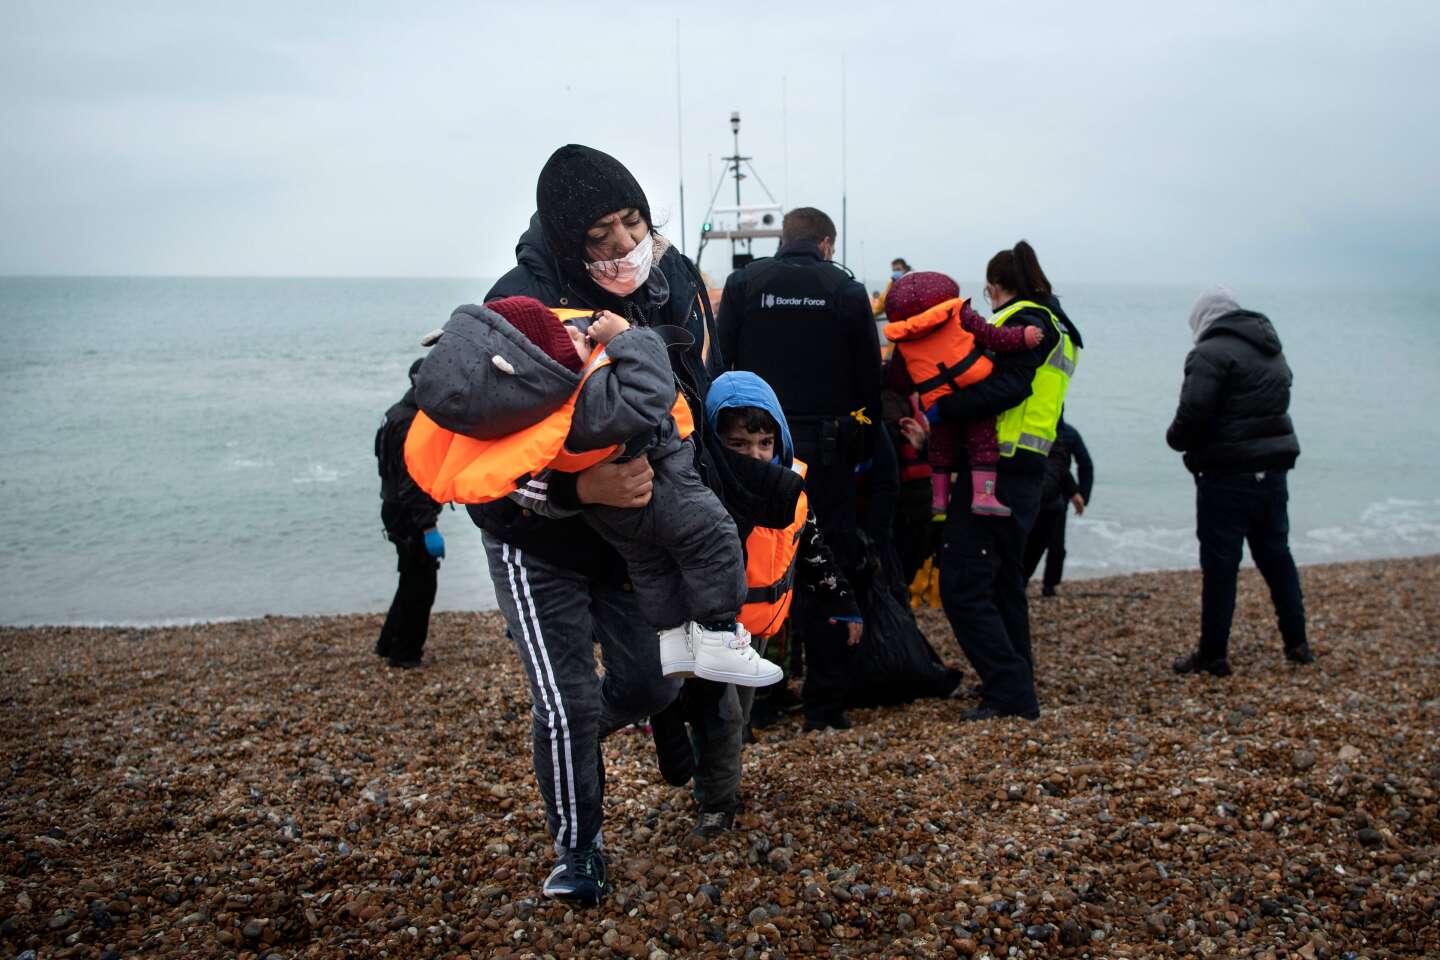 photo: Refugees crossing english channel